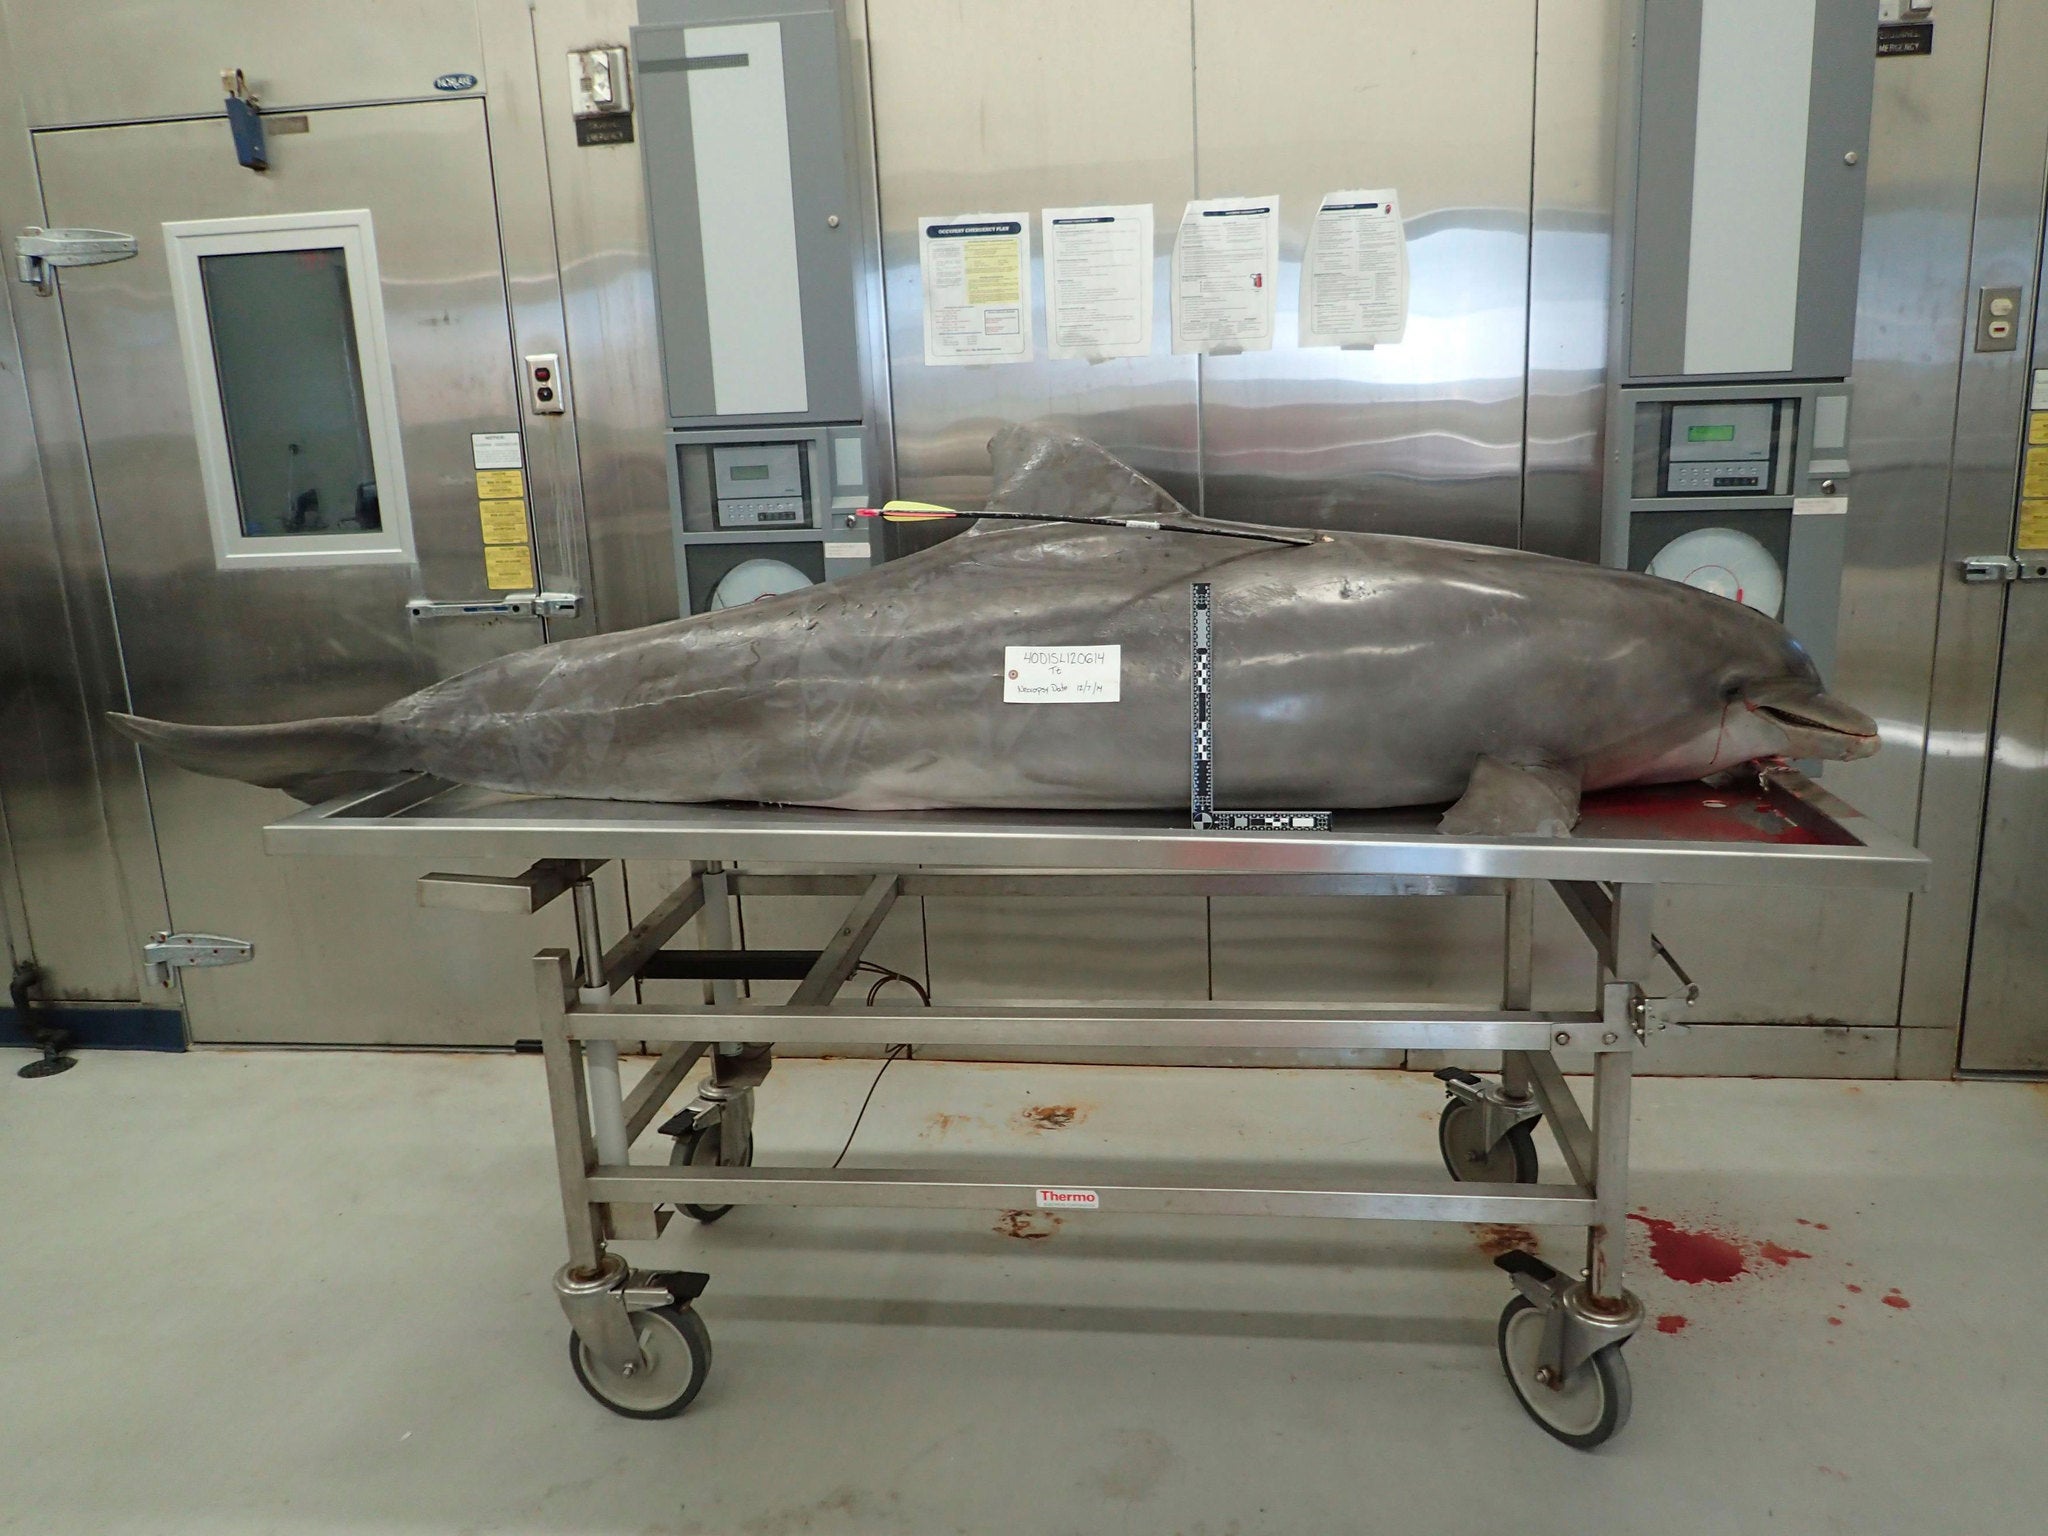 A dolphin killed with a hunting arrow in Orange Beach, Alabama is shown in this National Oceanic and Atmospheric Administration (NOAA) photo